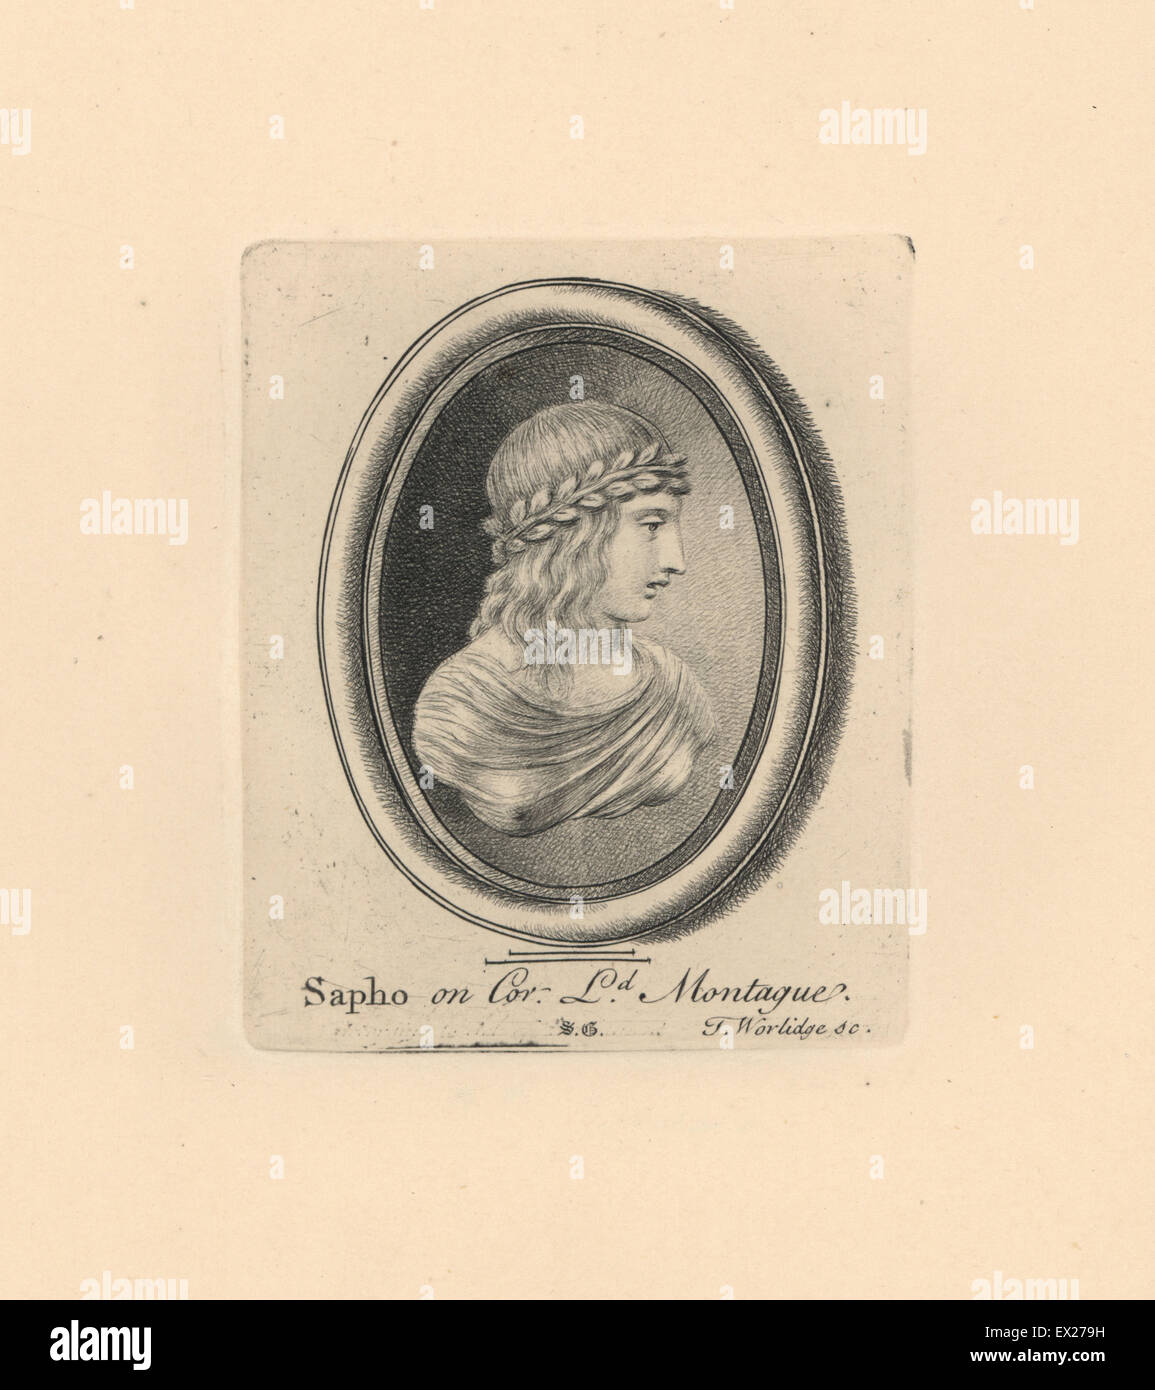 Portrait of Sapho or Sappho, Greek lyric poet from the island of Lesbos, wearing laurel wreath and diaphanous shawl, on cornelian in Lord Montague's collection. Copperplate engraving by Thomas Worlidge from James Vallentin's One Hundred and Eight Engravings from Antique Gems, 1863. Stock Photo